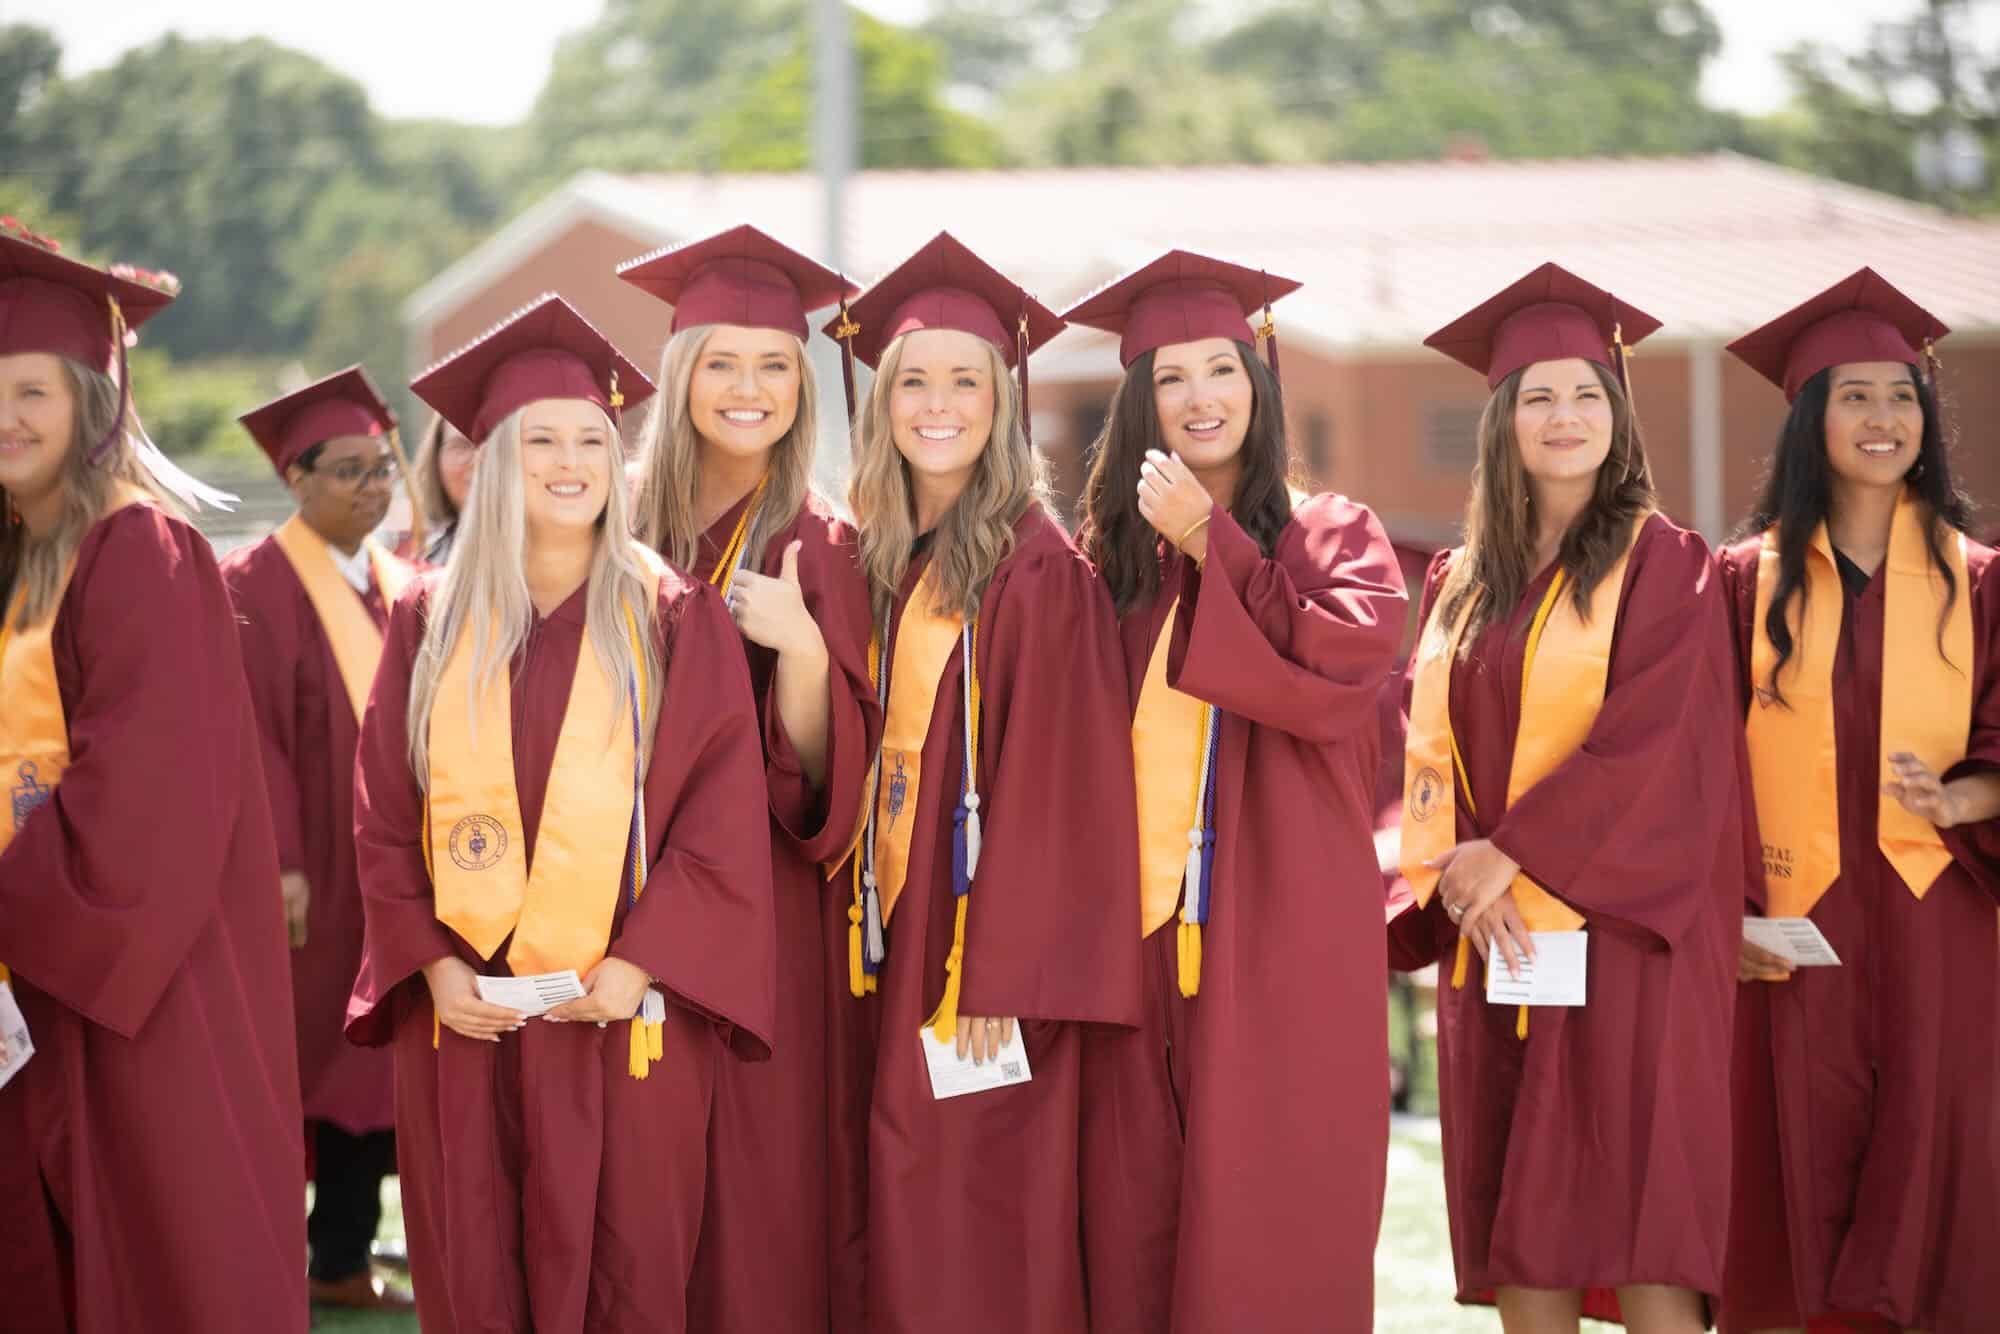 Group of young women wearing maroon robes wait in line at graduation.